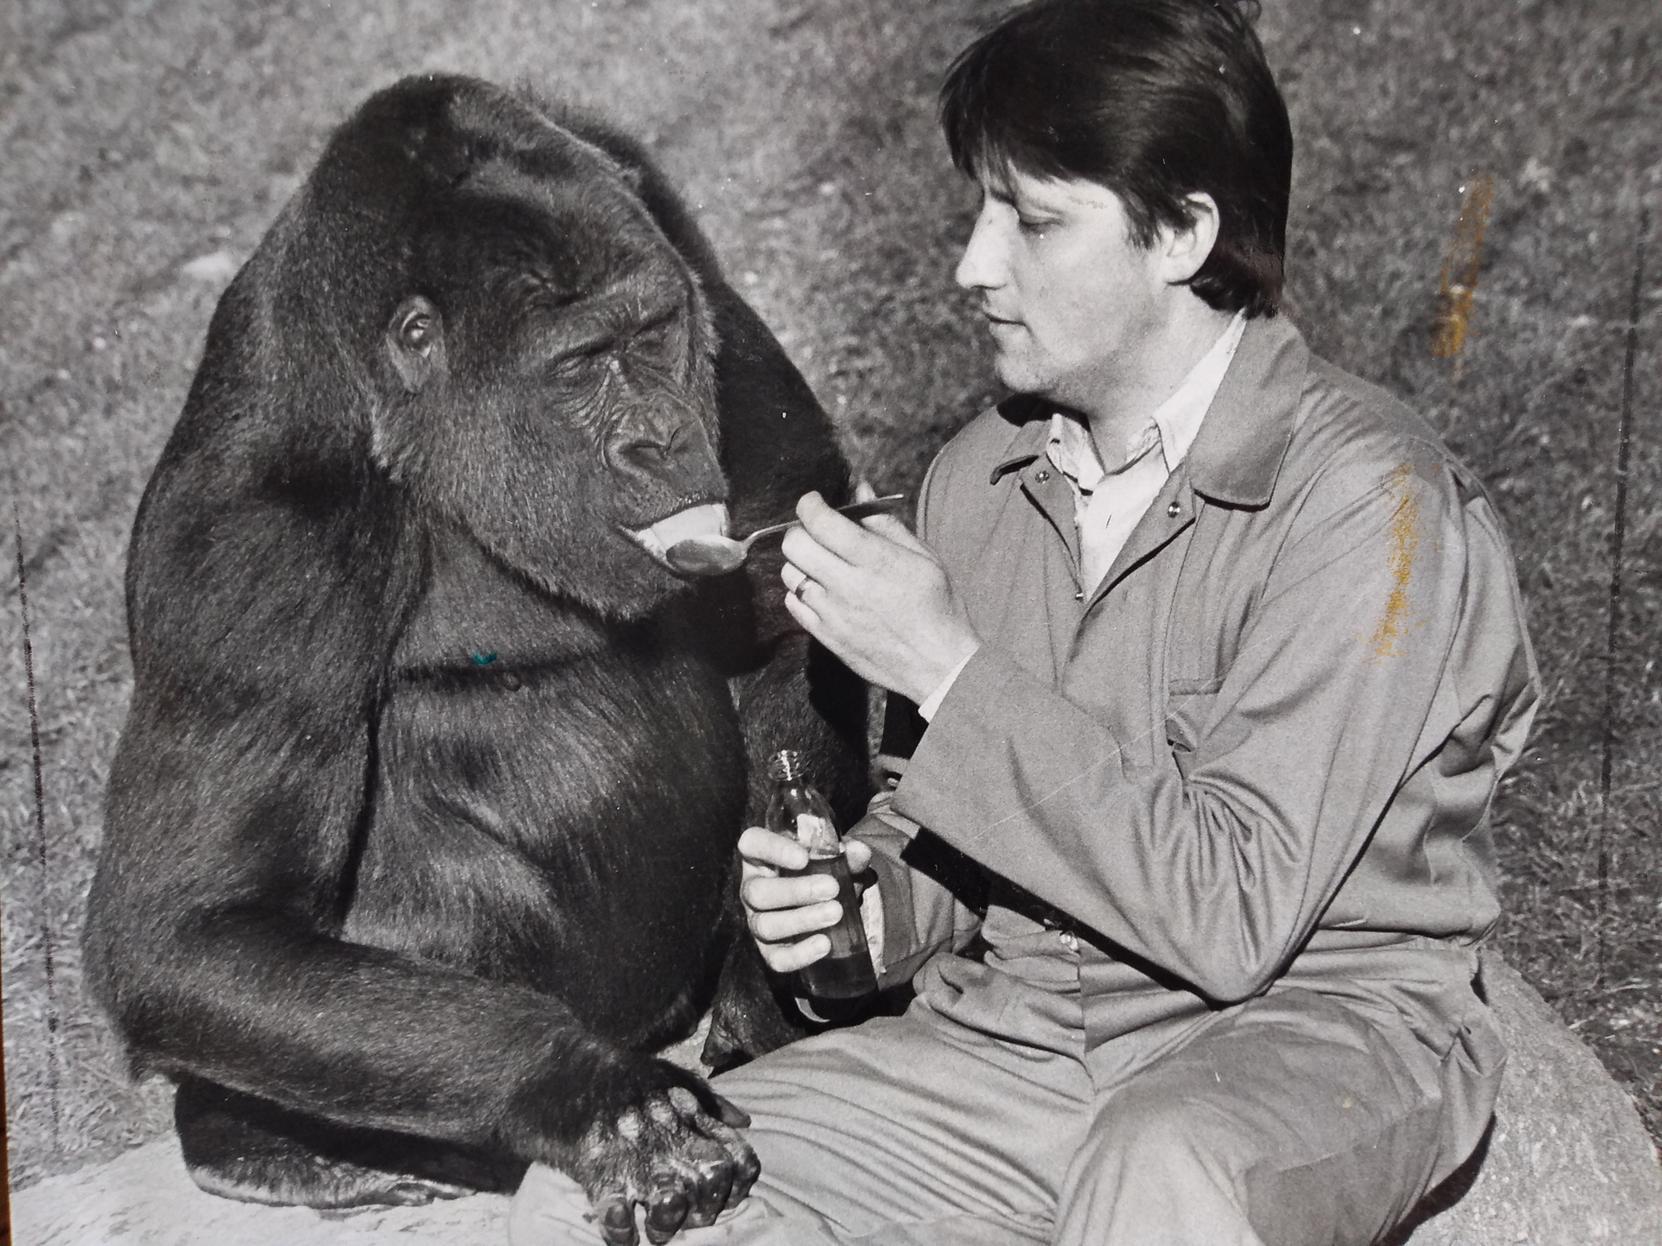 No babies yet, but expectant Lomie, a 10-year-old gorilla, was due to produce her offspring at any time. She is pictured with her keeper Mike Clarkson who was giving her a daily dose of medicine